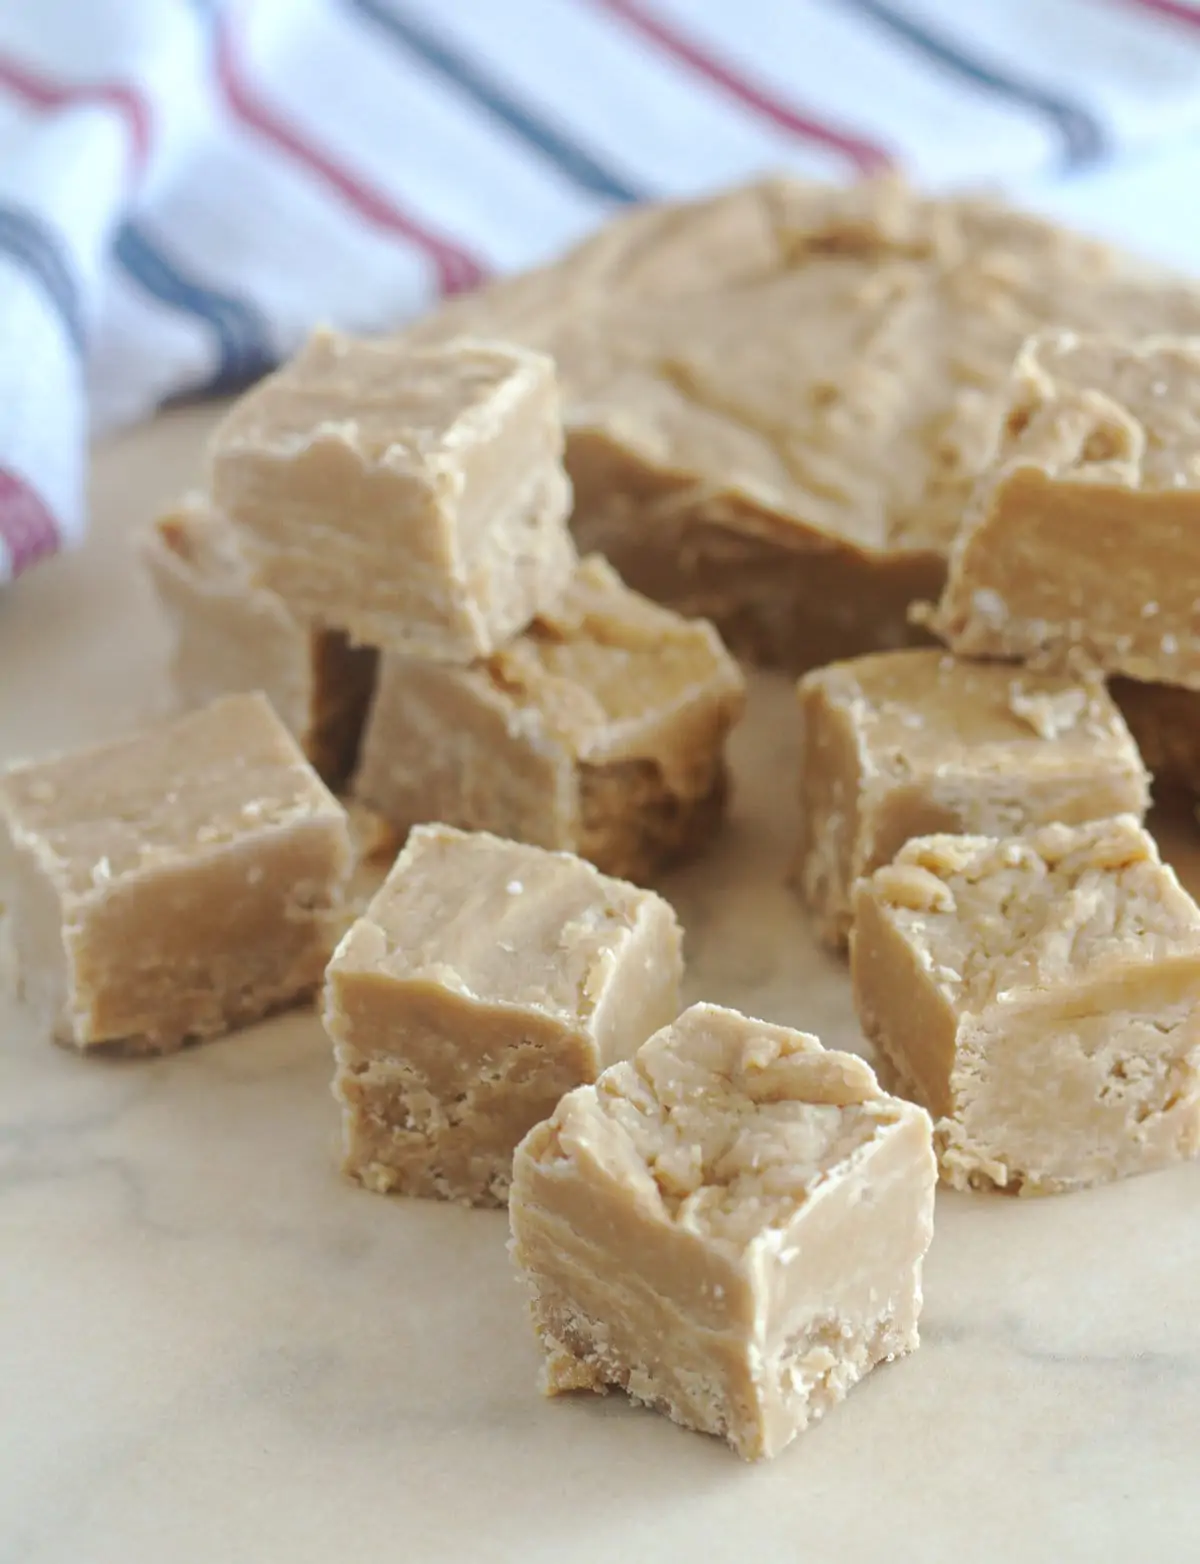 Squares of fudge scattered across a piece of parchment paper.